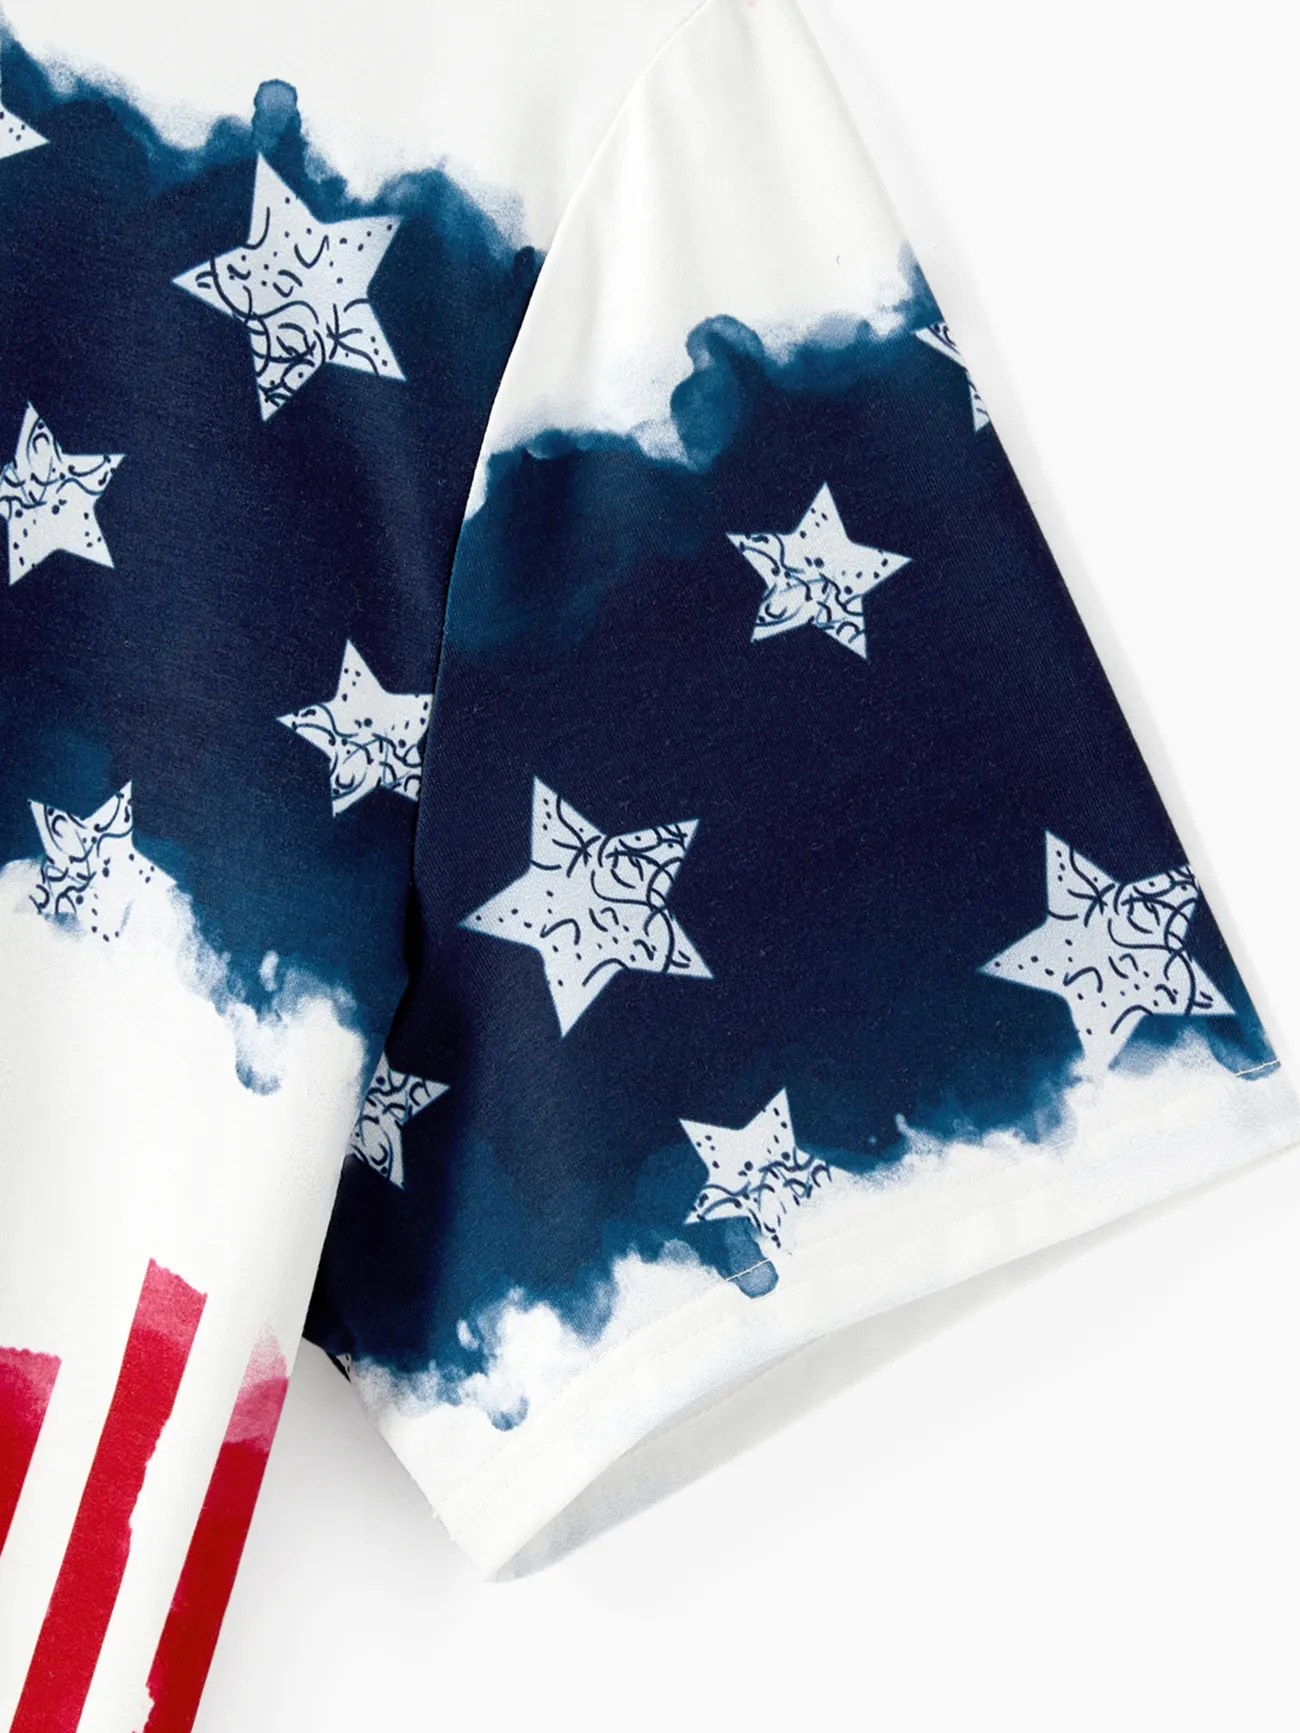 Independence Day Family Matching Allover Star Print Naia™ Cami Dresses and T-shirts Sets REDWHITE big image 1